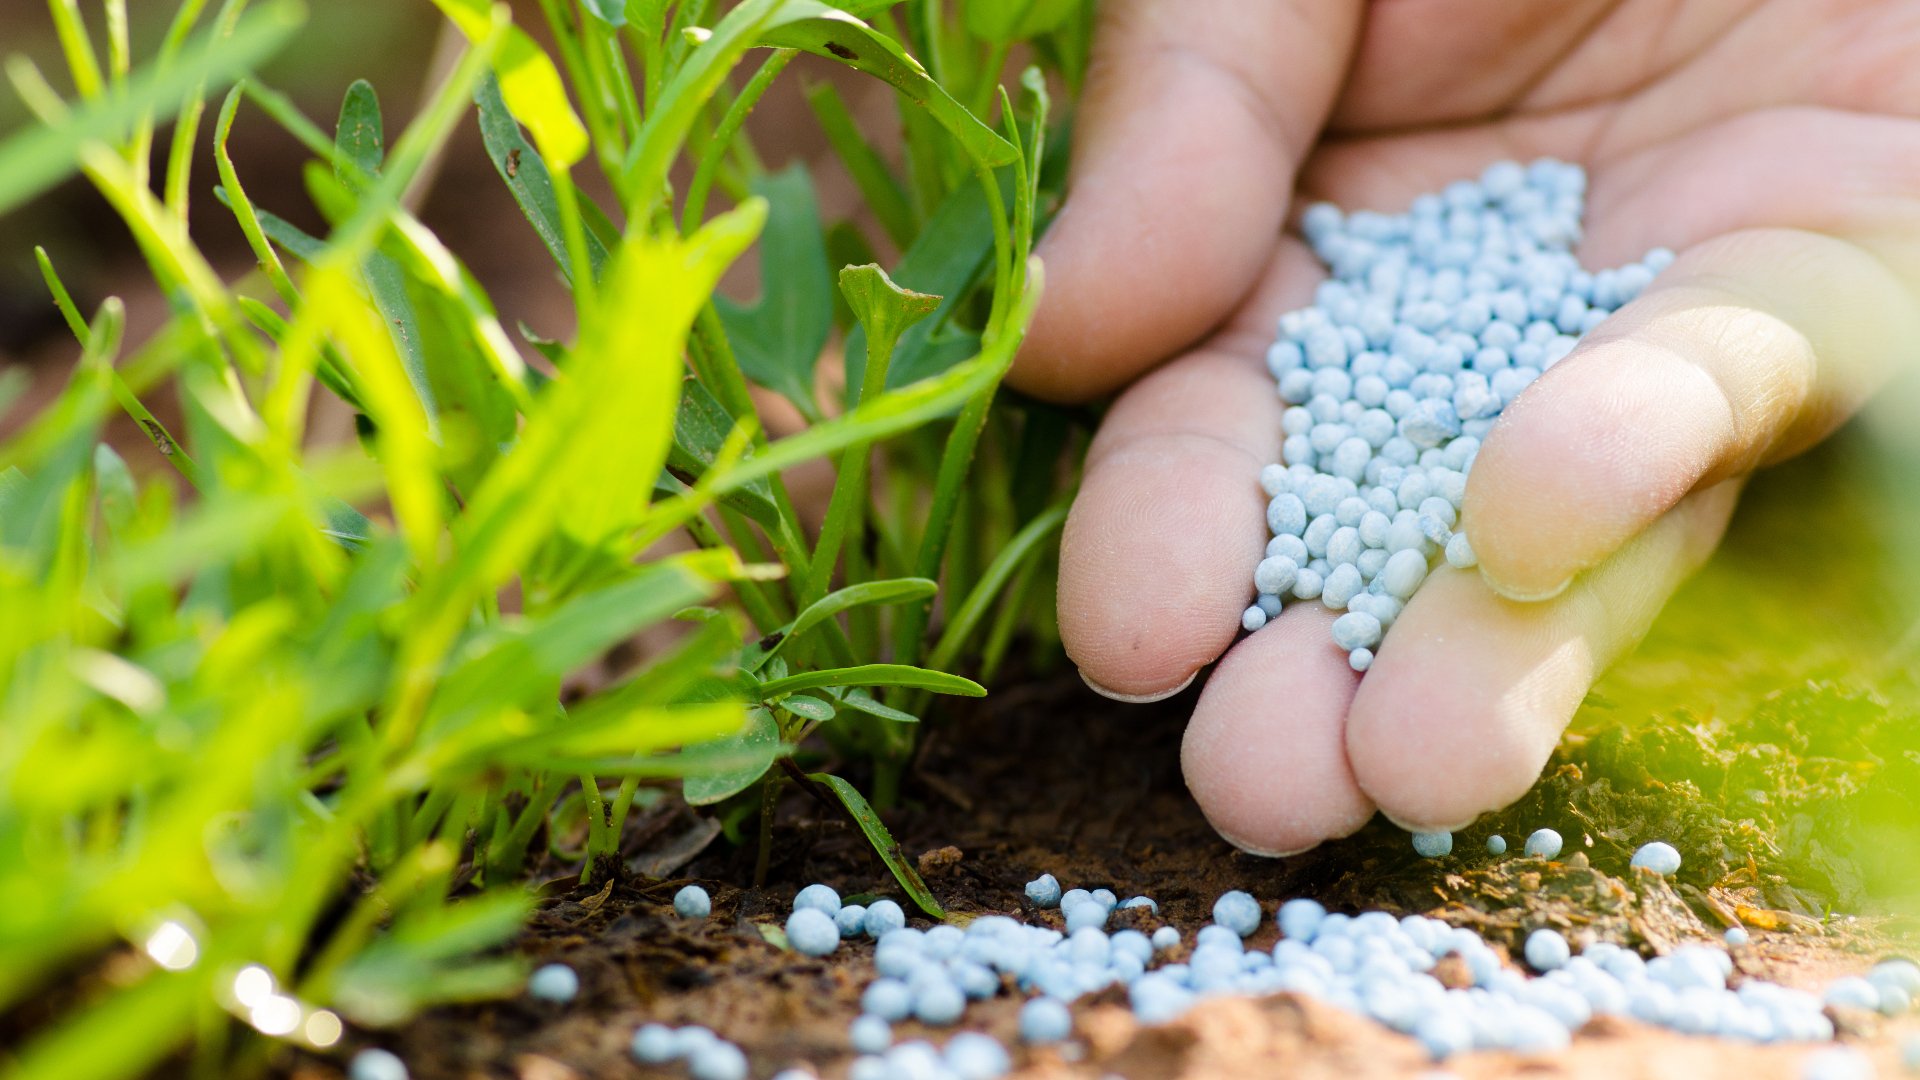 Too Much Fertilizer Can Be a Bad Thing - Don’t Overfertilize Your Lawn!